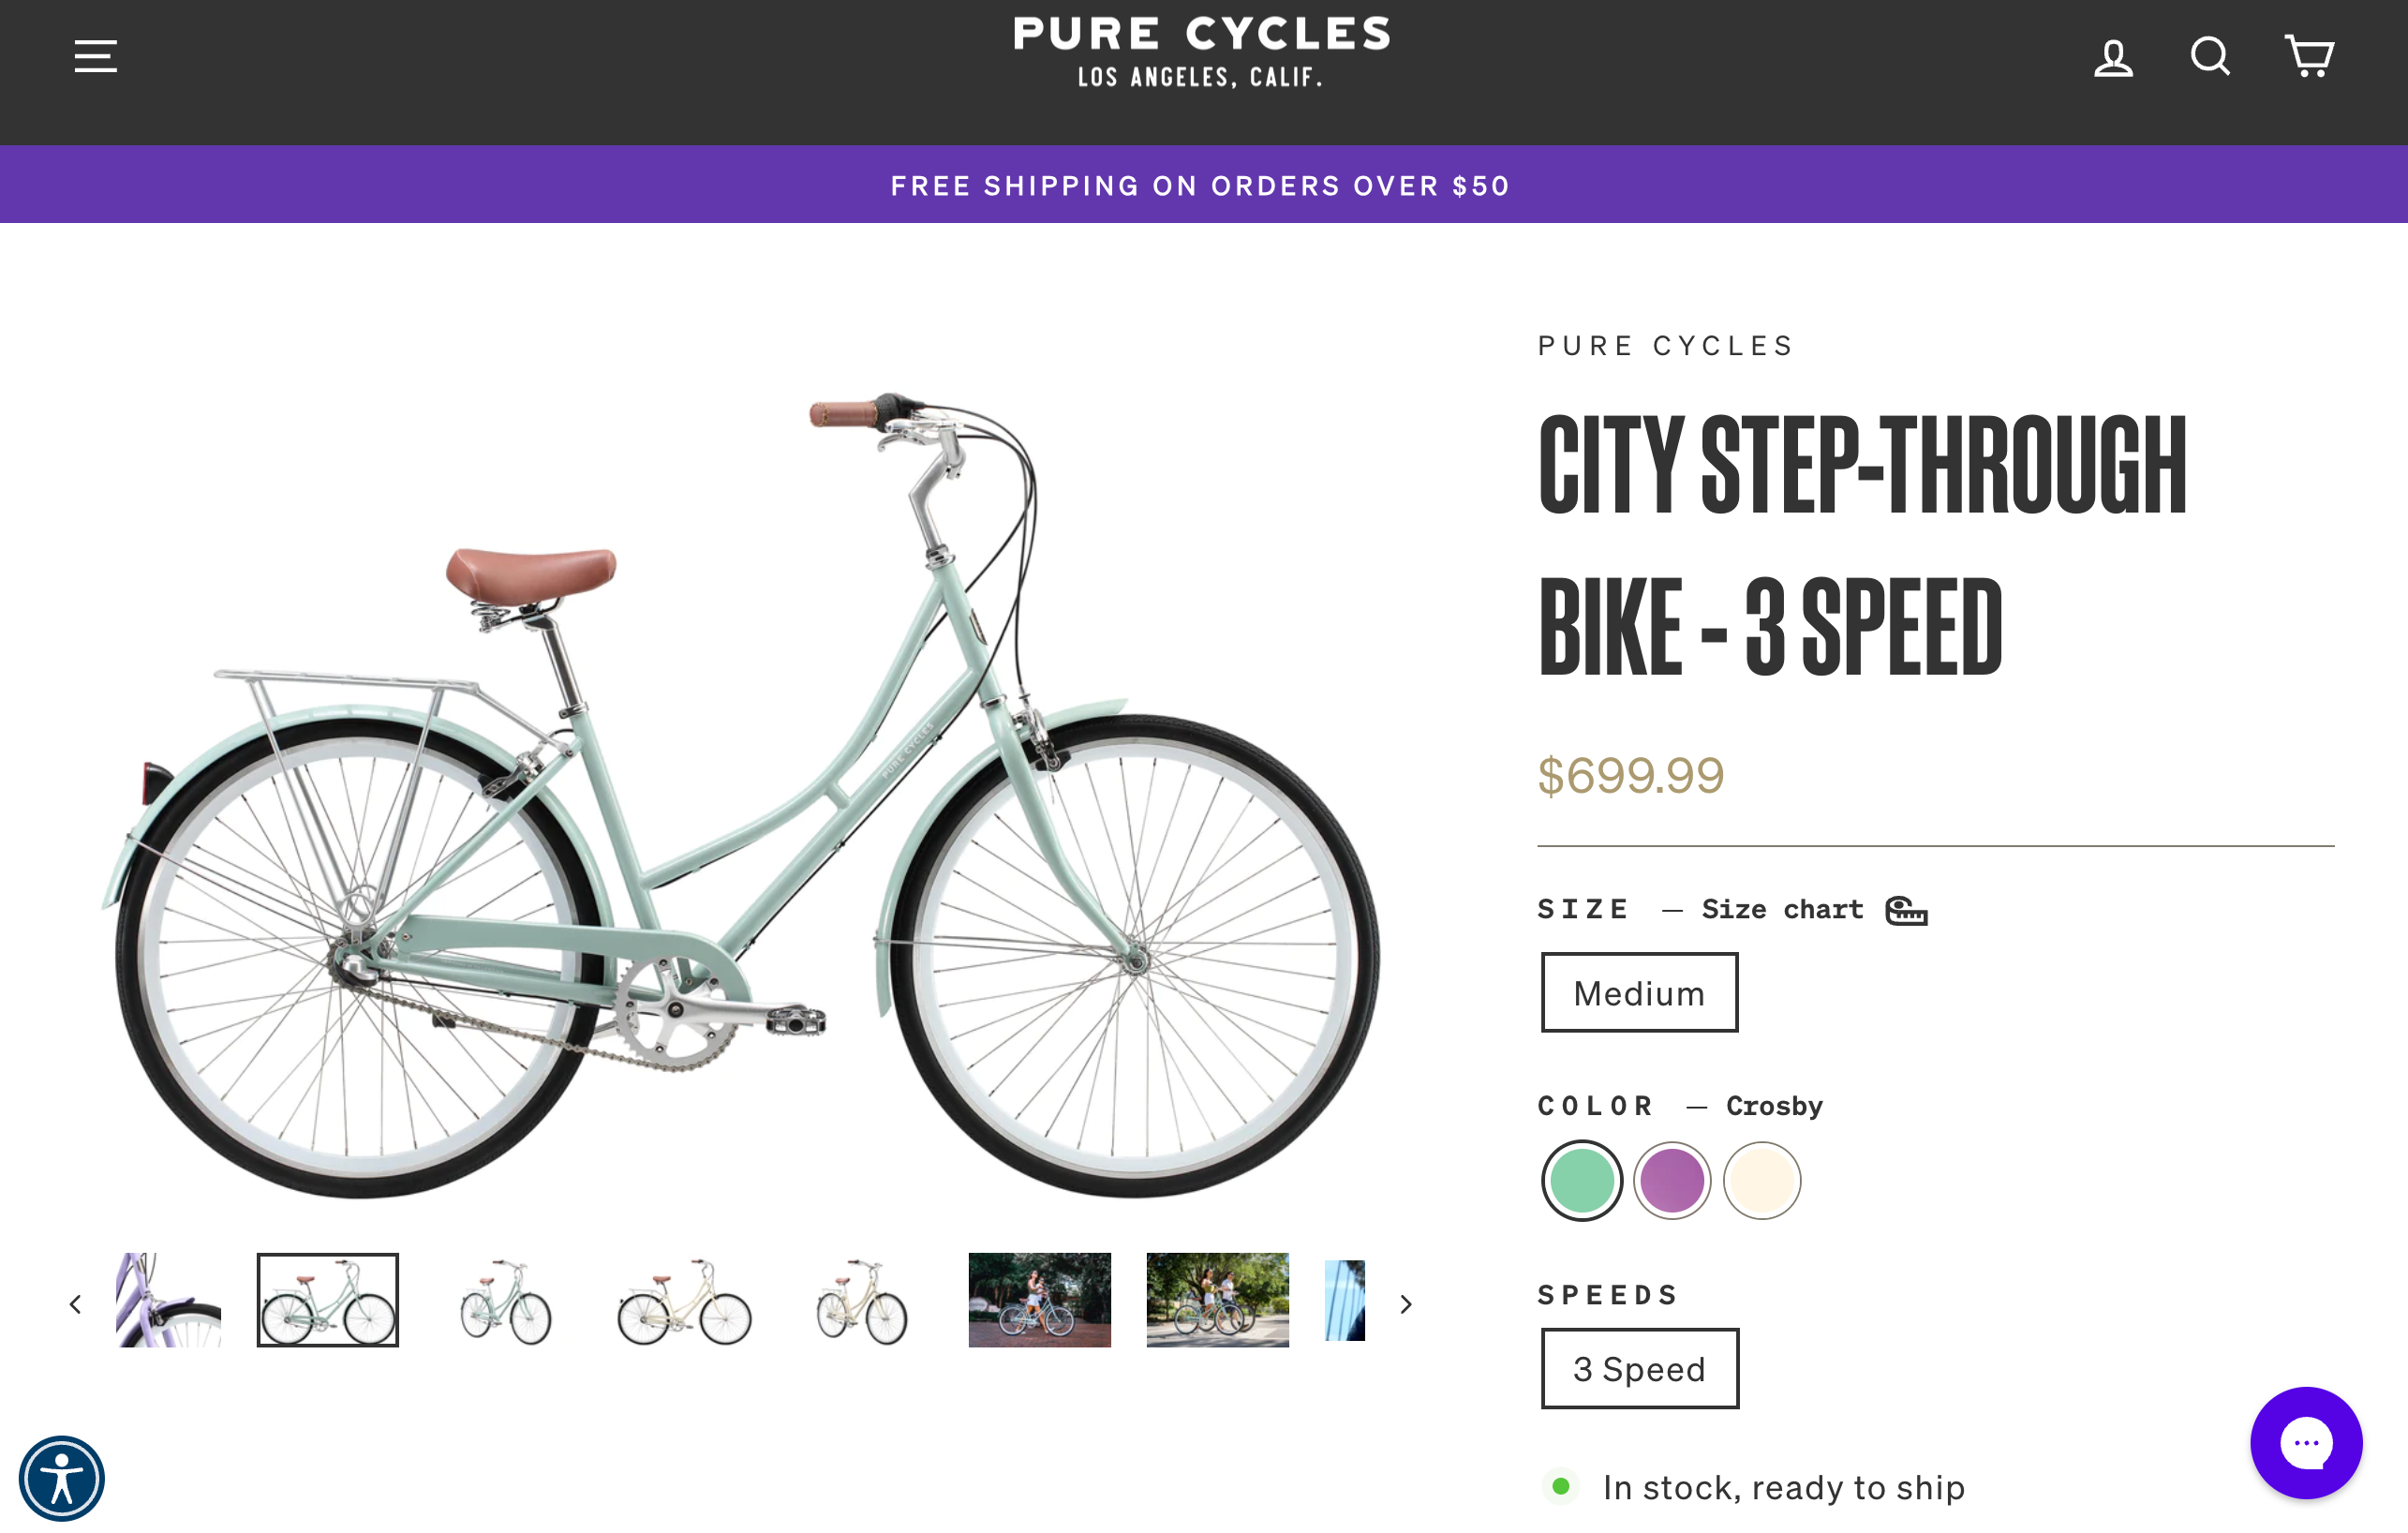 Screen grab of product page on the Pure Cycles ecommerce website